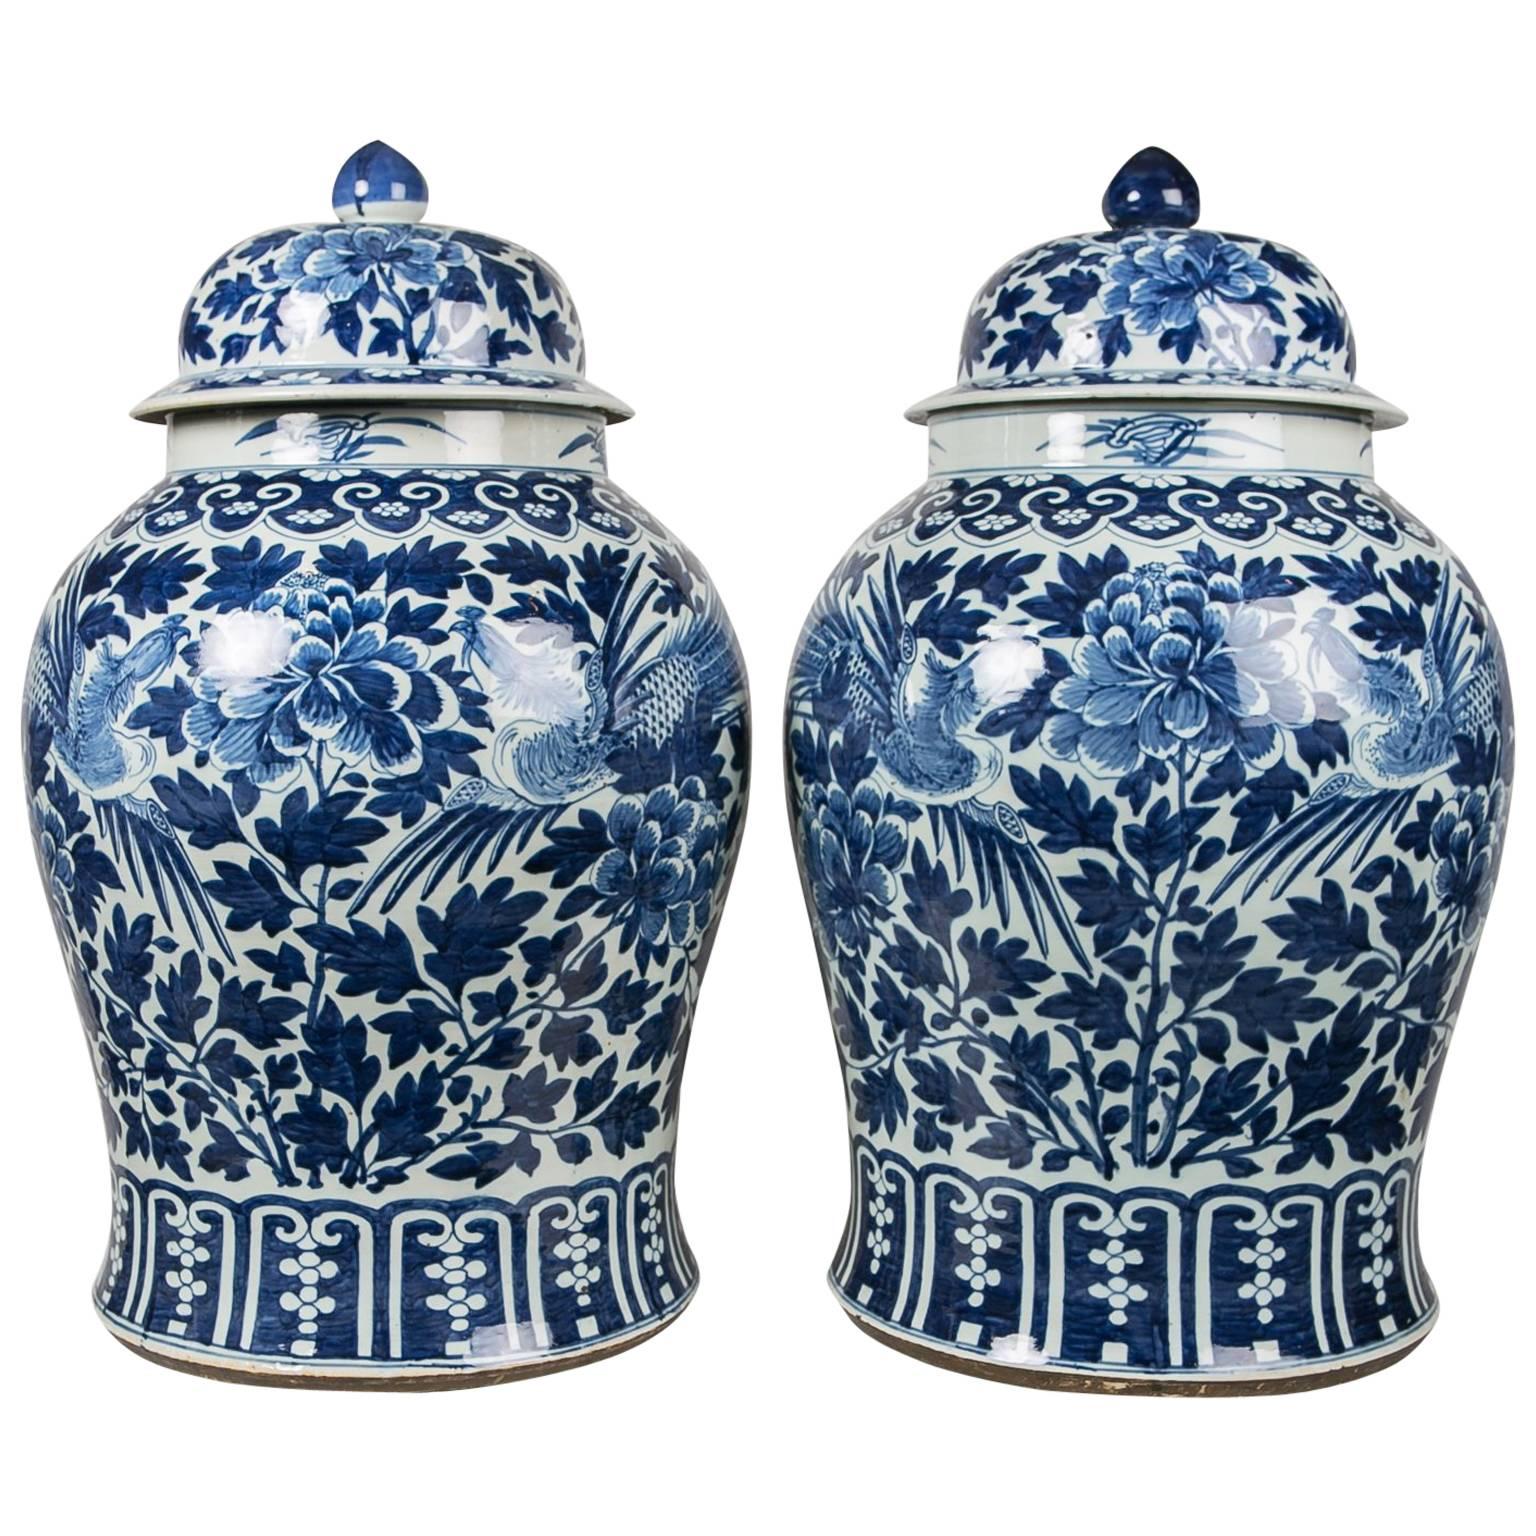 Blue and White Chinese Porcelain Ginger Jars